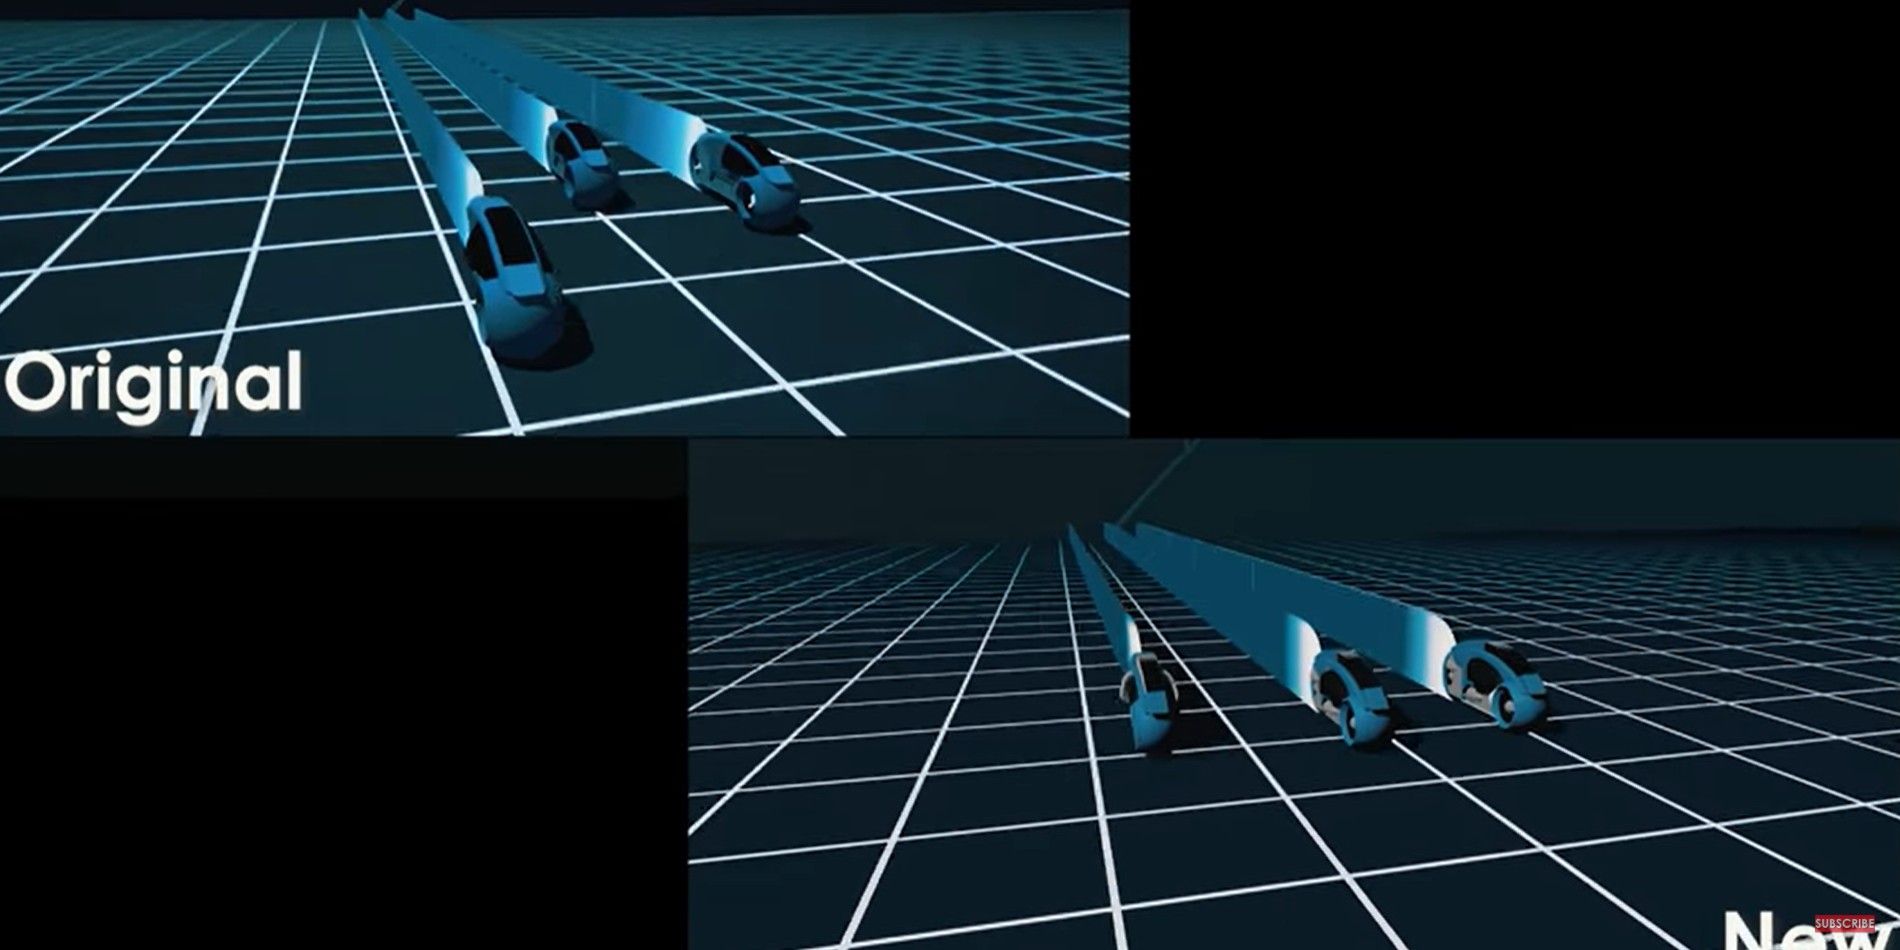 Tron light cycle scene recreated with today's VFX